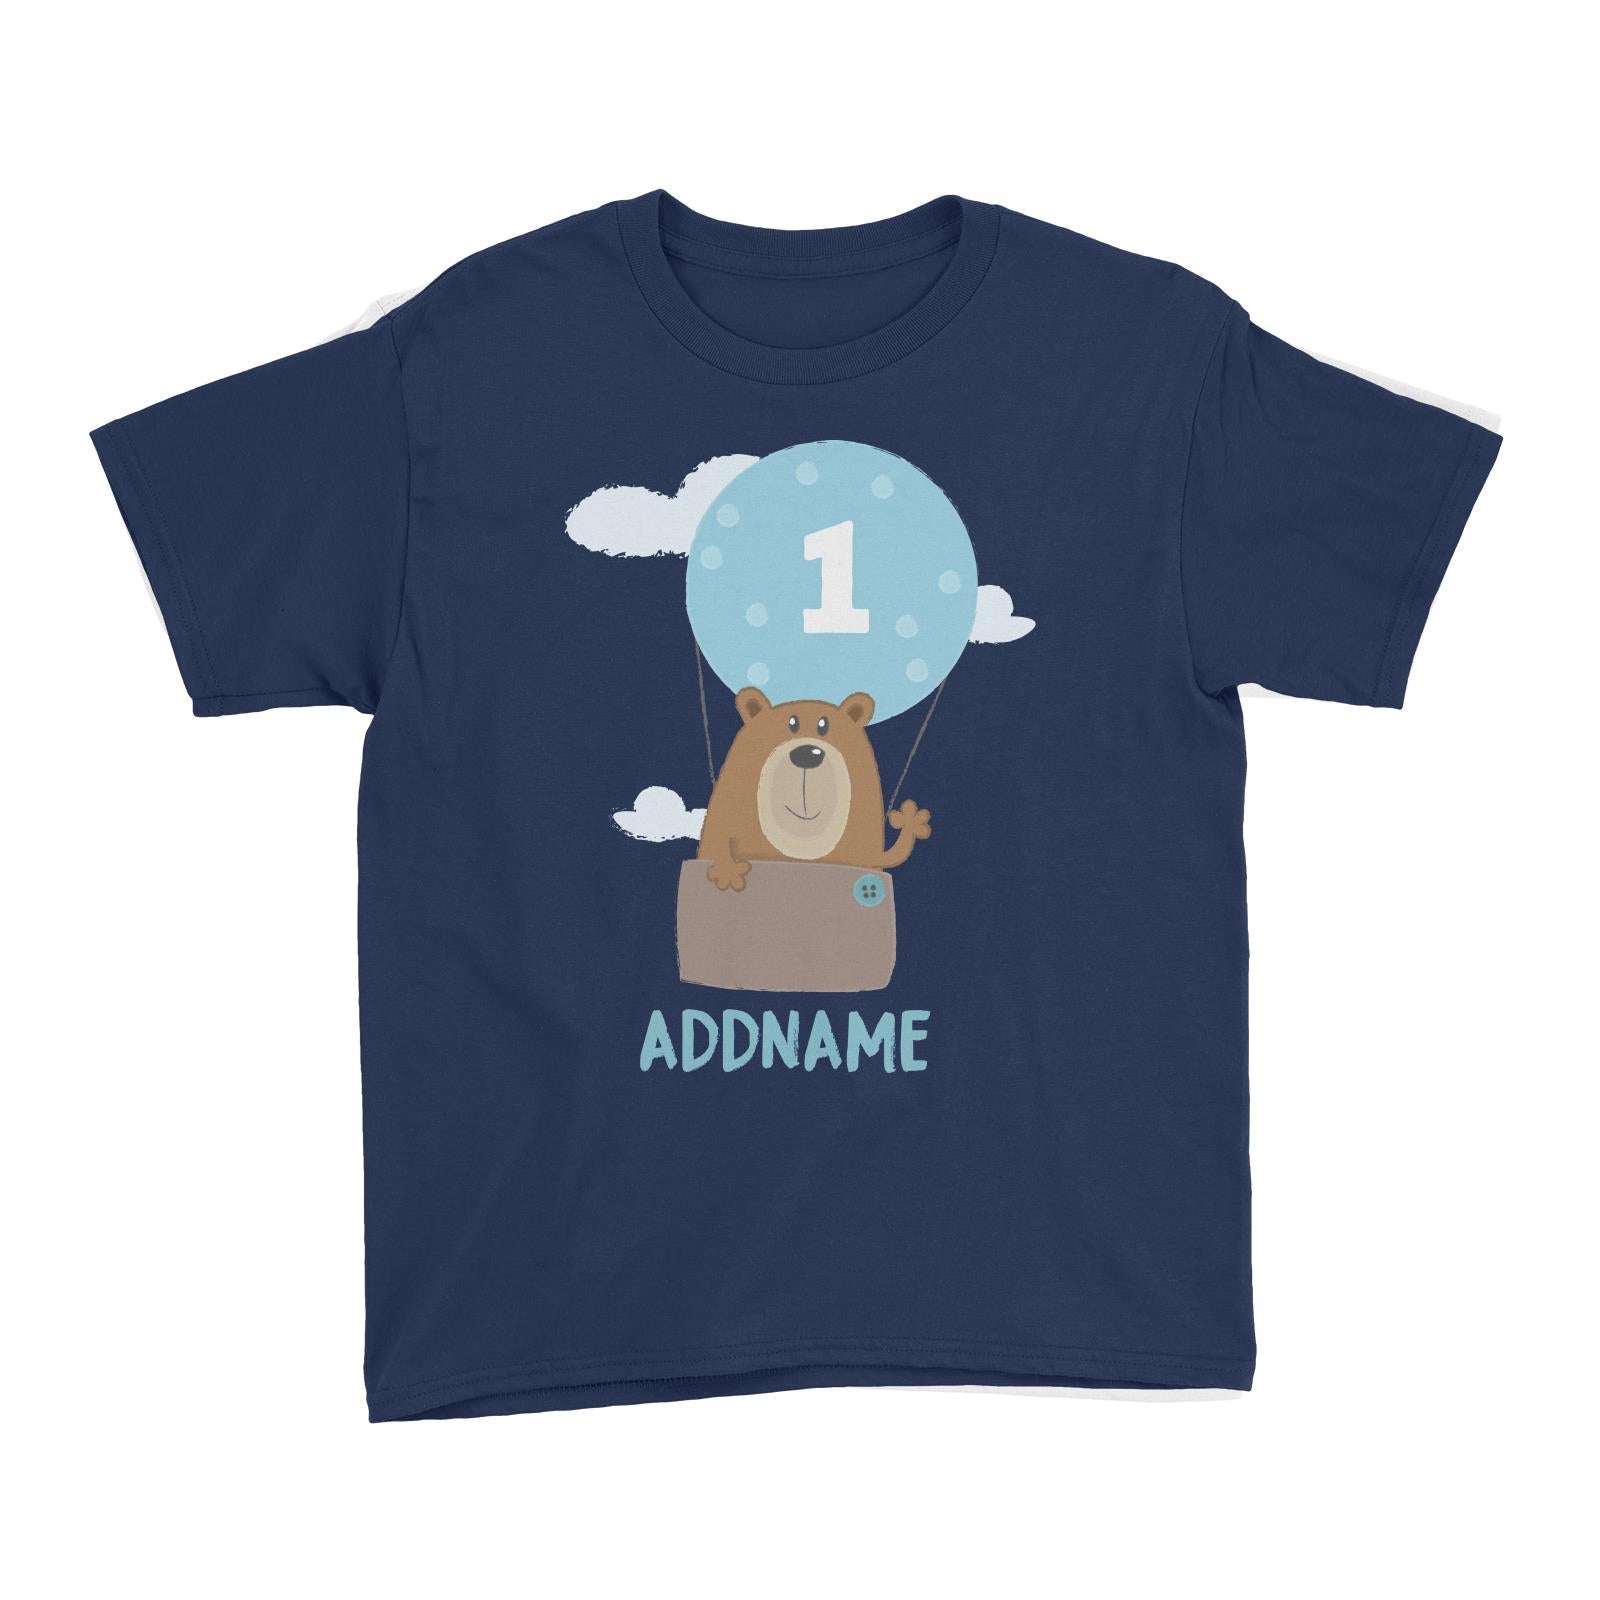 Cute Bear Boy with Hot Air Balloon Birthday Theme Personalizable with Name and Number Kid's T-Shirt